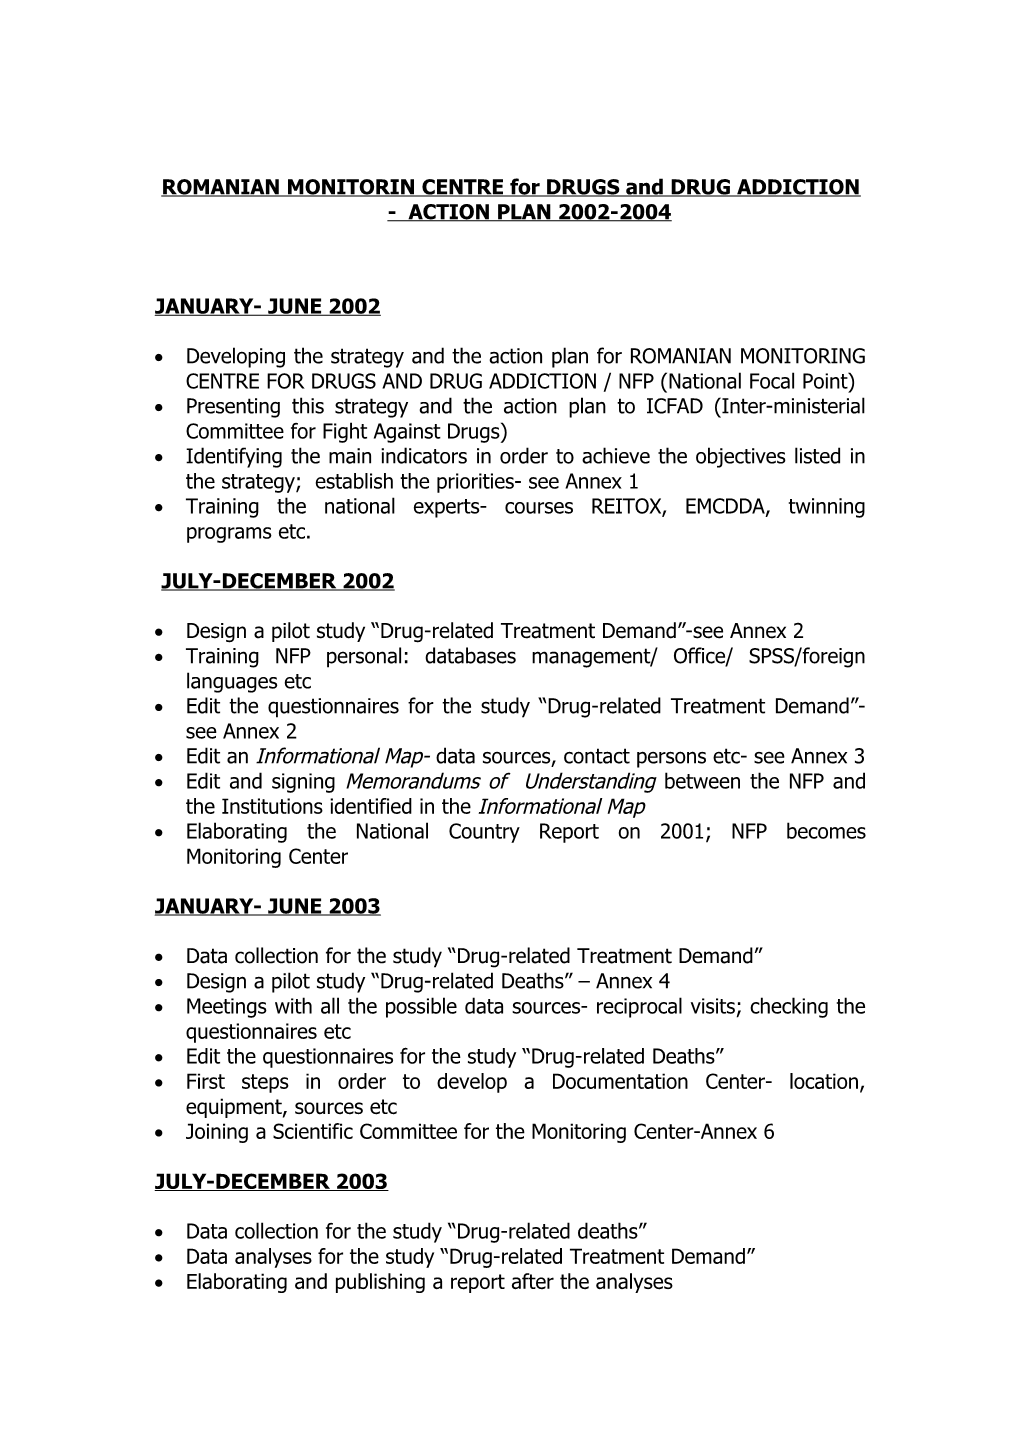 Joint National Action Plan 2002-2004